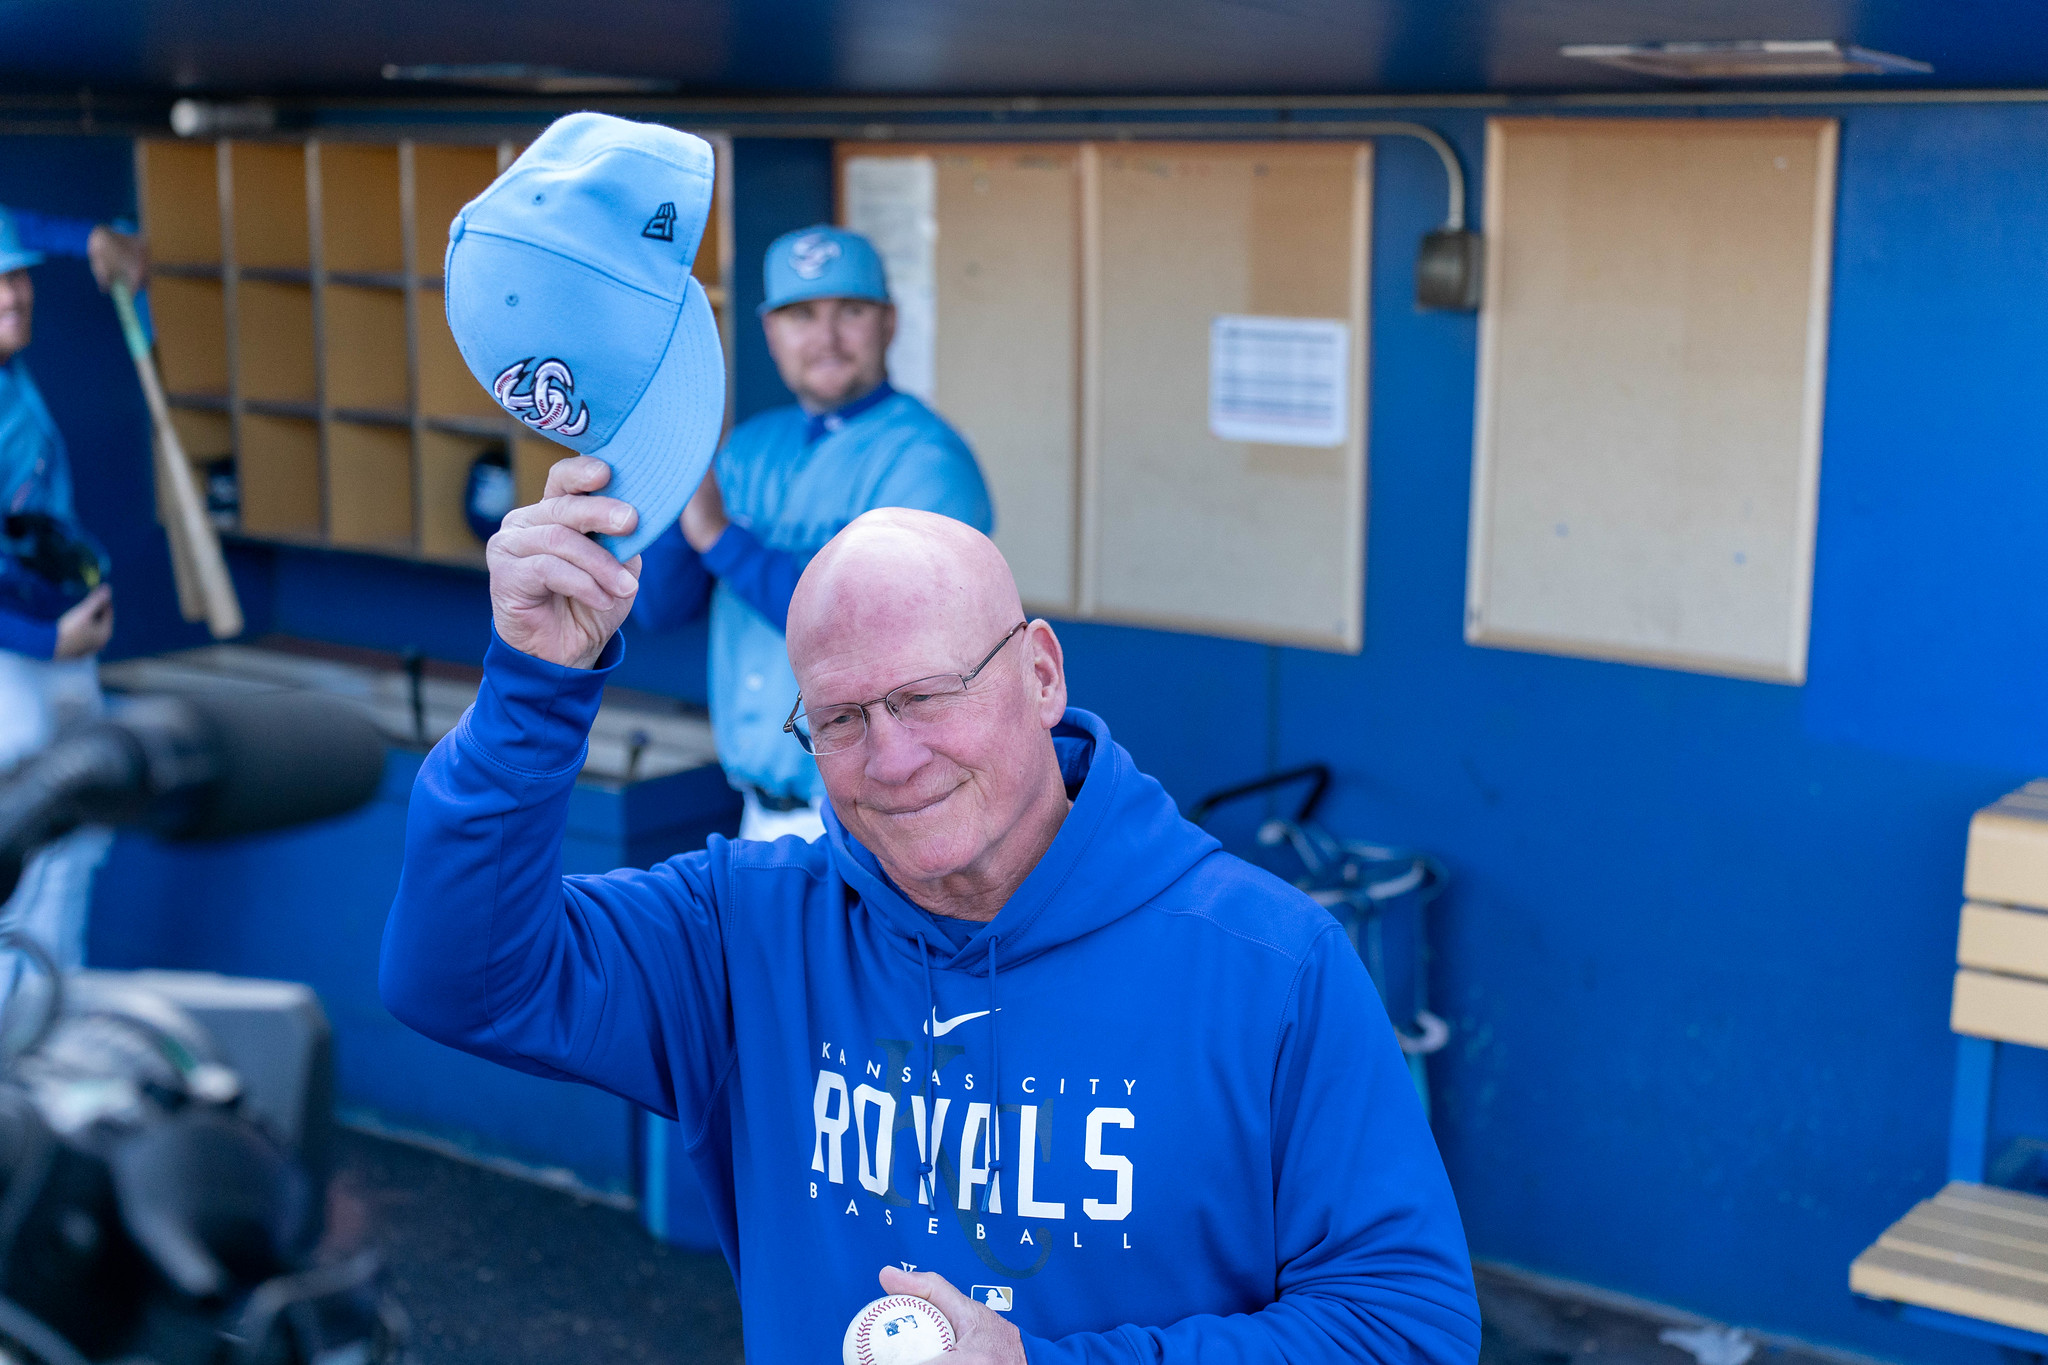 A view into the dugout of a white man with a bald head tipping his light blue baseball cap.